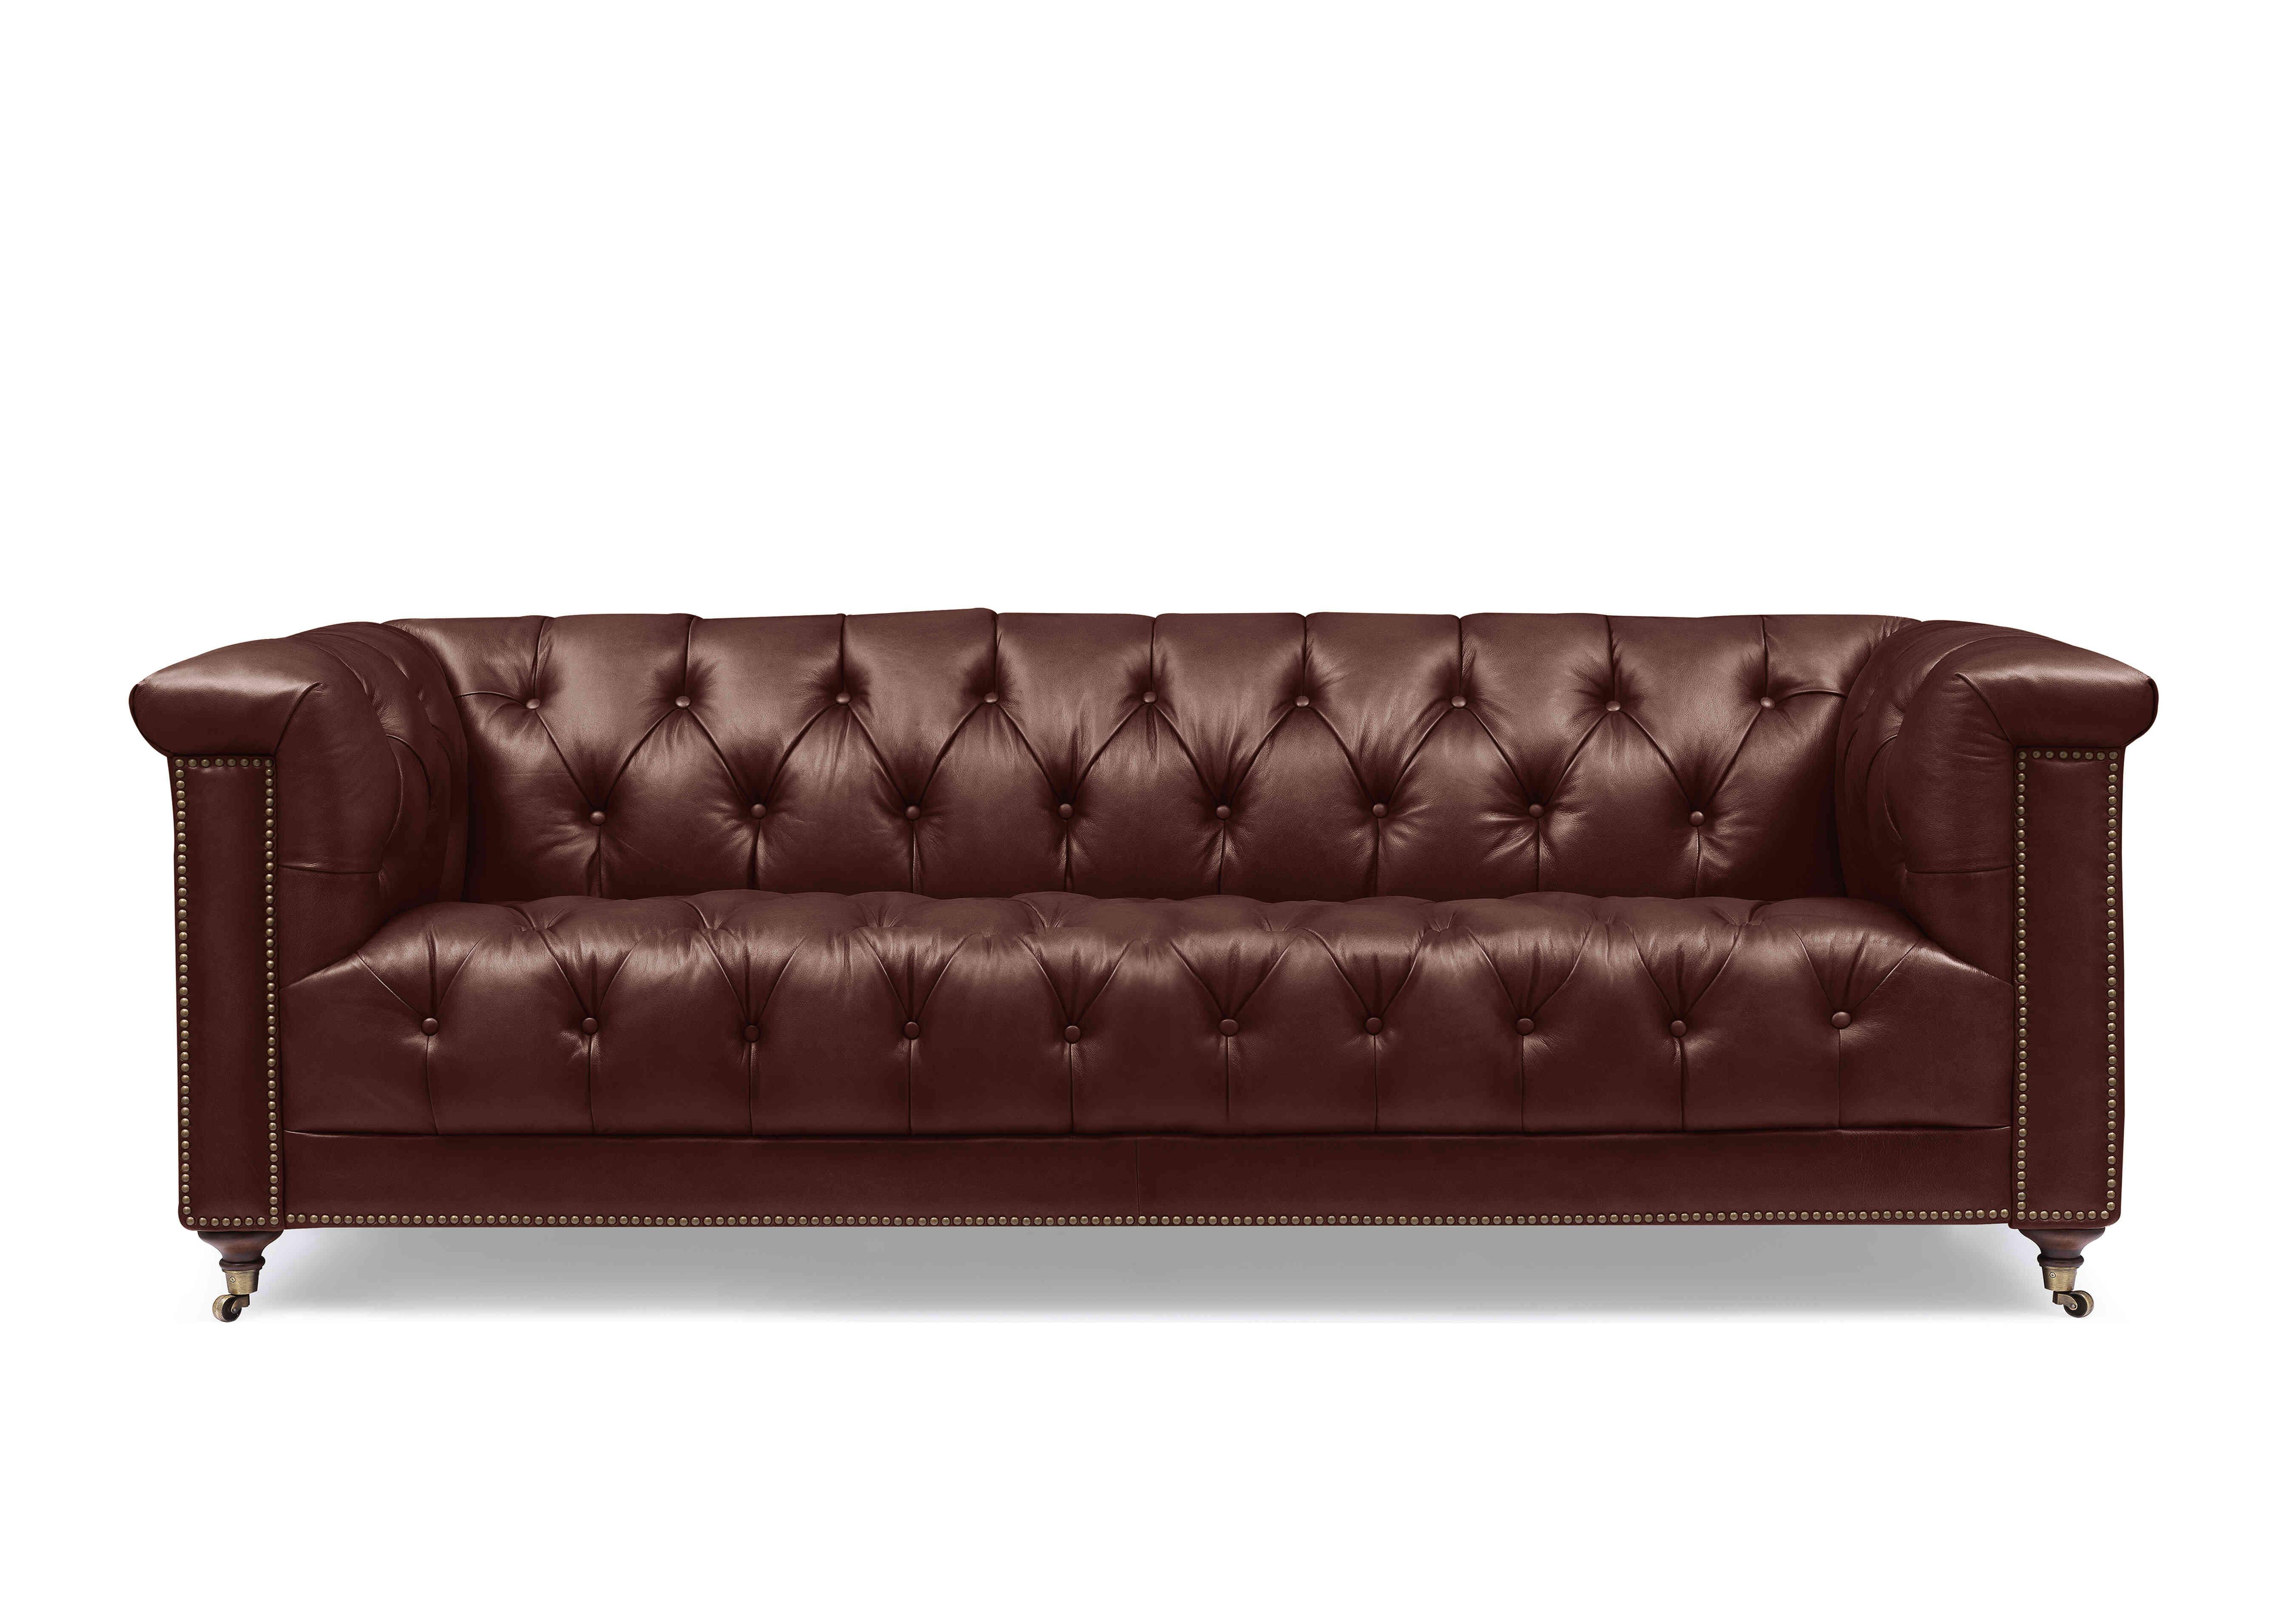 Wallace 4 Seater Leather Chesterfield Sofa in X3y1-1964ls Merlot on Furniture Village